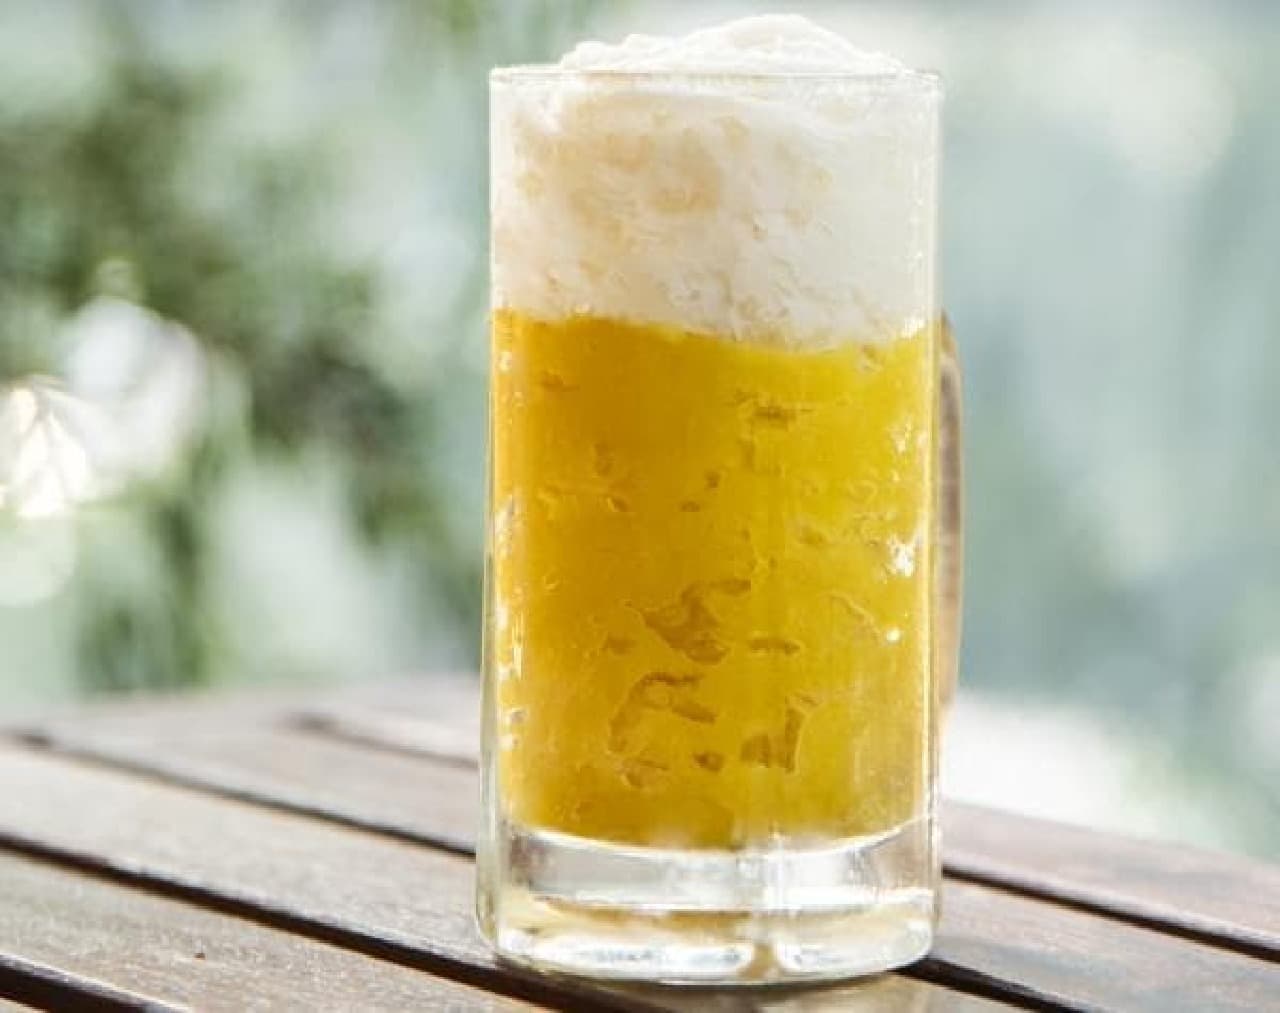 Ice monster "beer shaved ice"